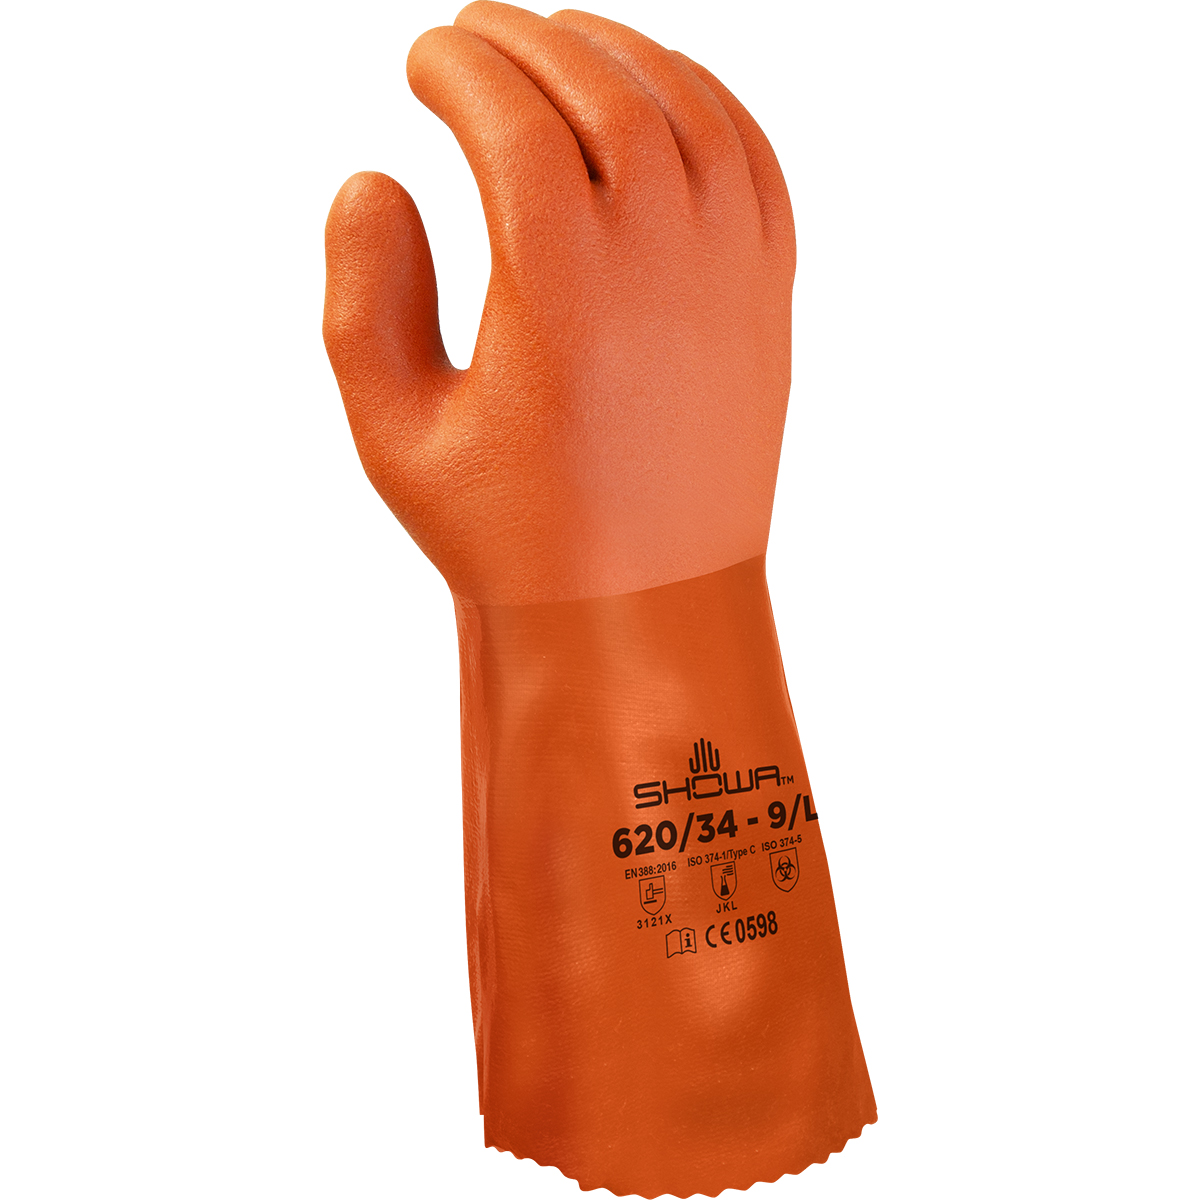 Chemical resistant PVC fully coated double dipped, seamless knitted liner, 12" length, orange, rough finish, extra large